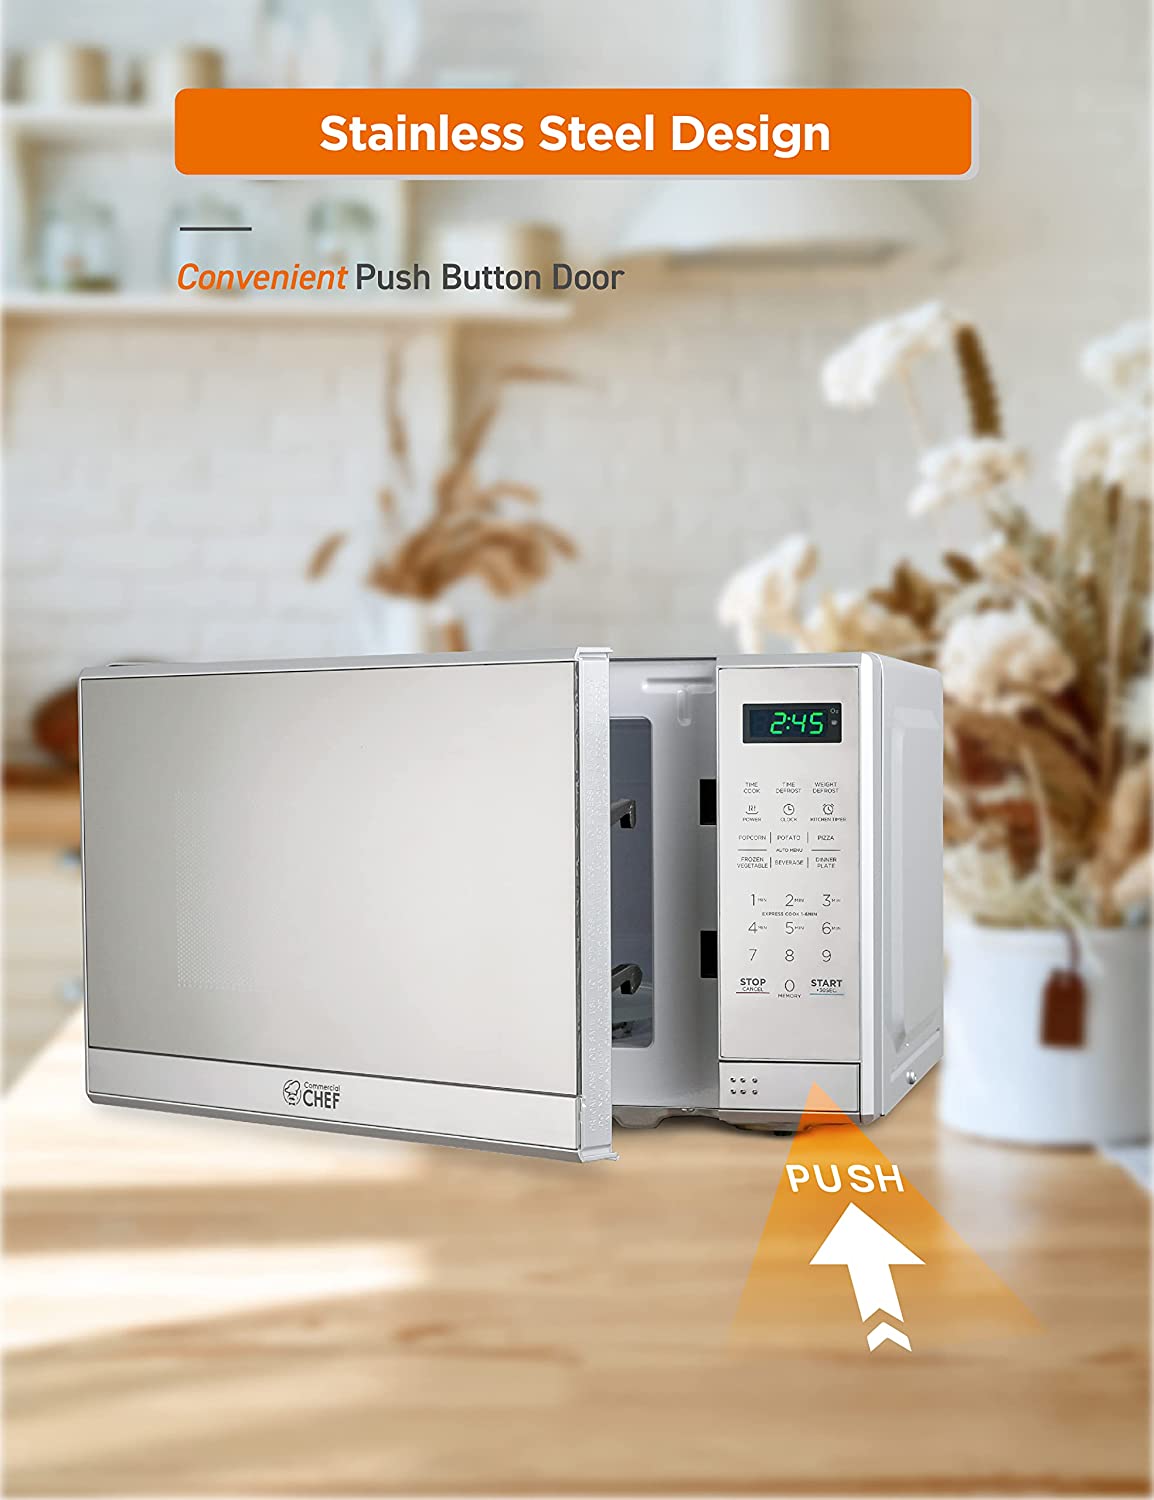 https://bigbigmart.com/wp-content/uploads/2023/07/COMMERCIAL-CHEF-Small-Microwave-0.7-Cu.-Ft.-Countertop-Microwave-with-Digital-Display-Stainless-Steel-Microwave-with-10-Power-Levels-Outstanding-Portable-Microwave-with-Convenient-Push-Button4.jpg